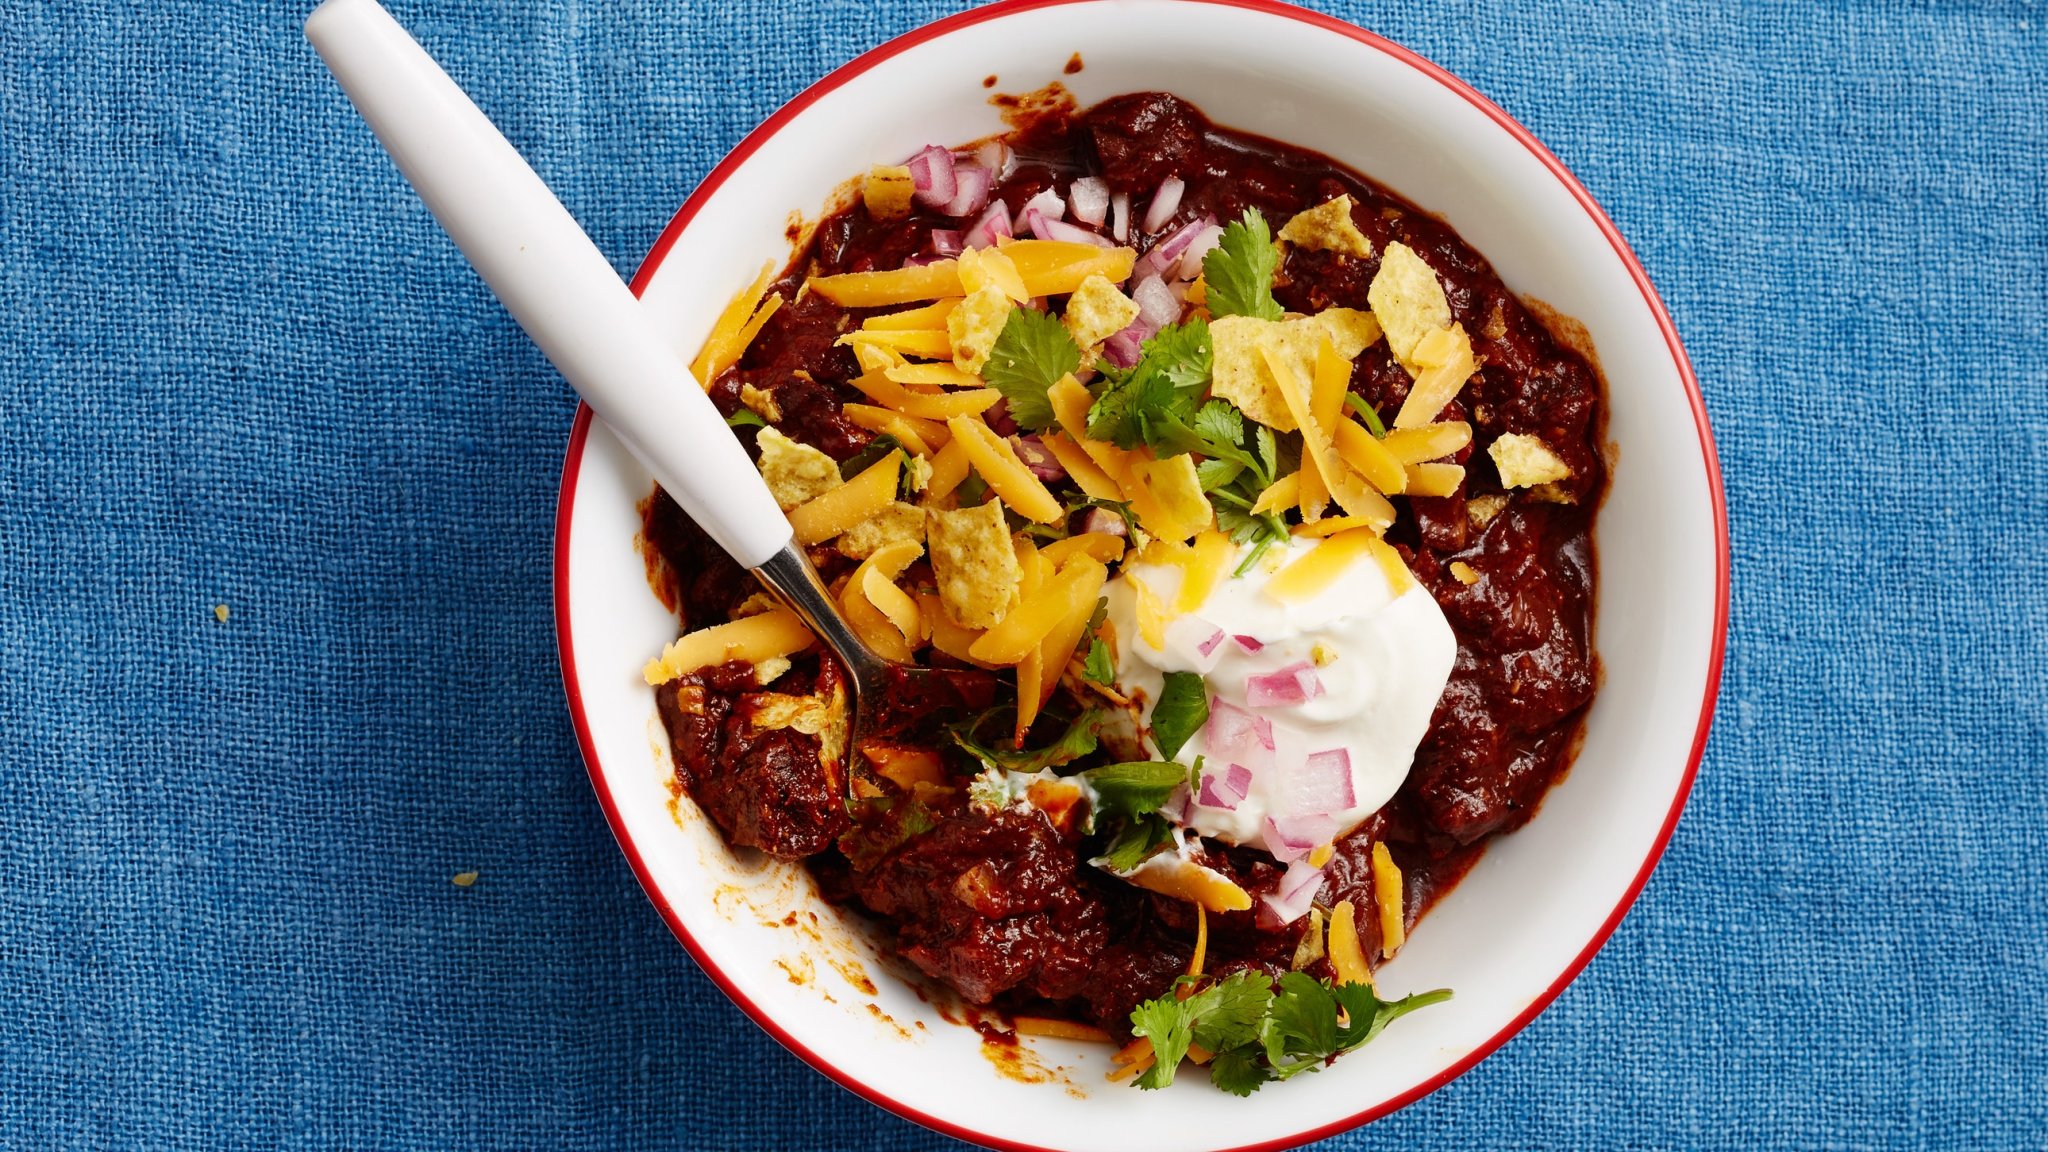 9 Chili Recipes for Your Super Bowl Party